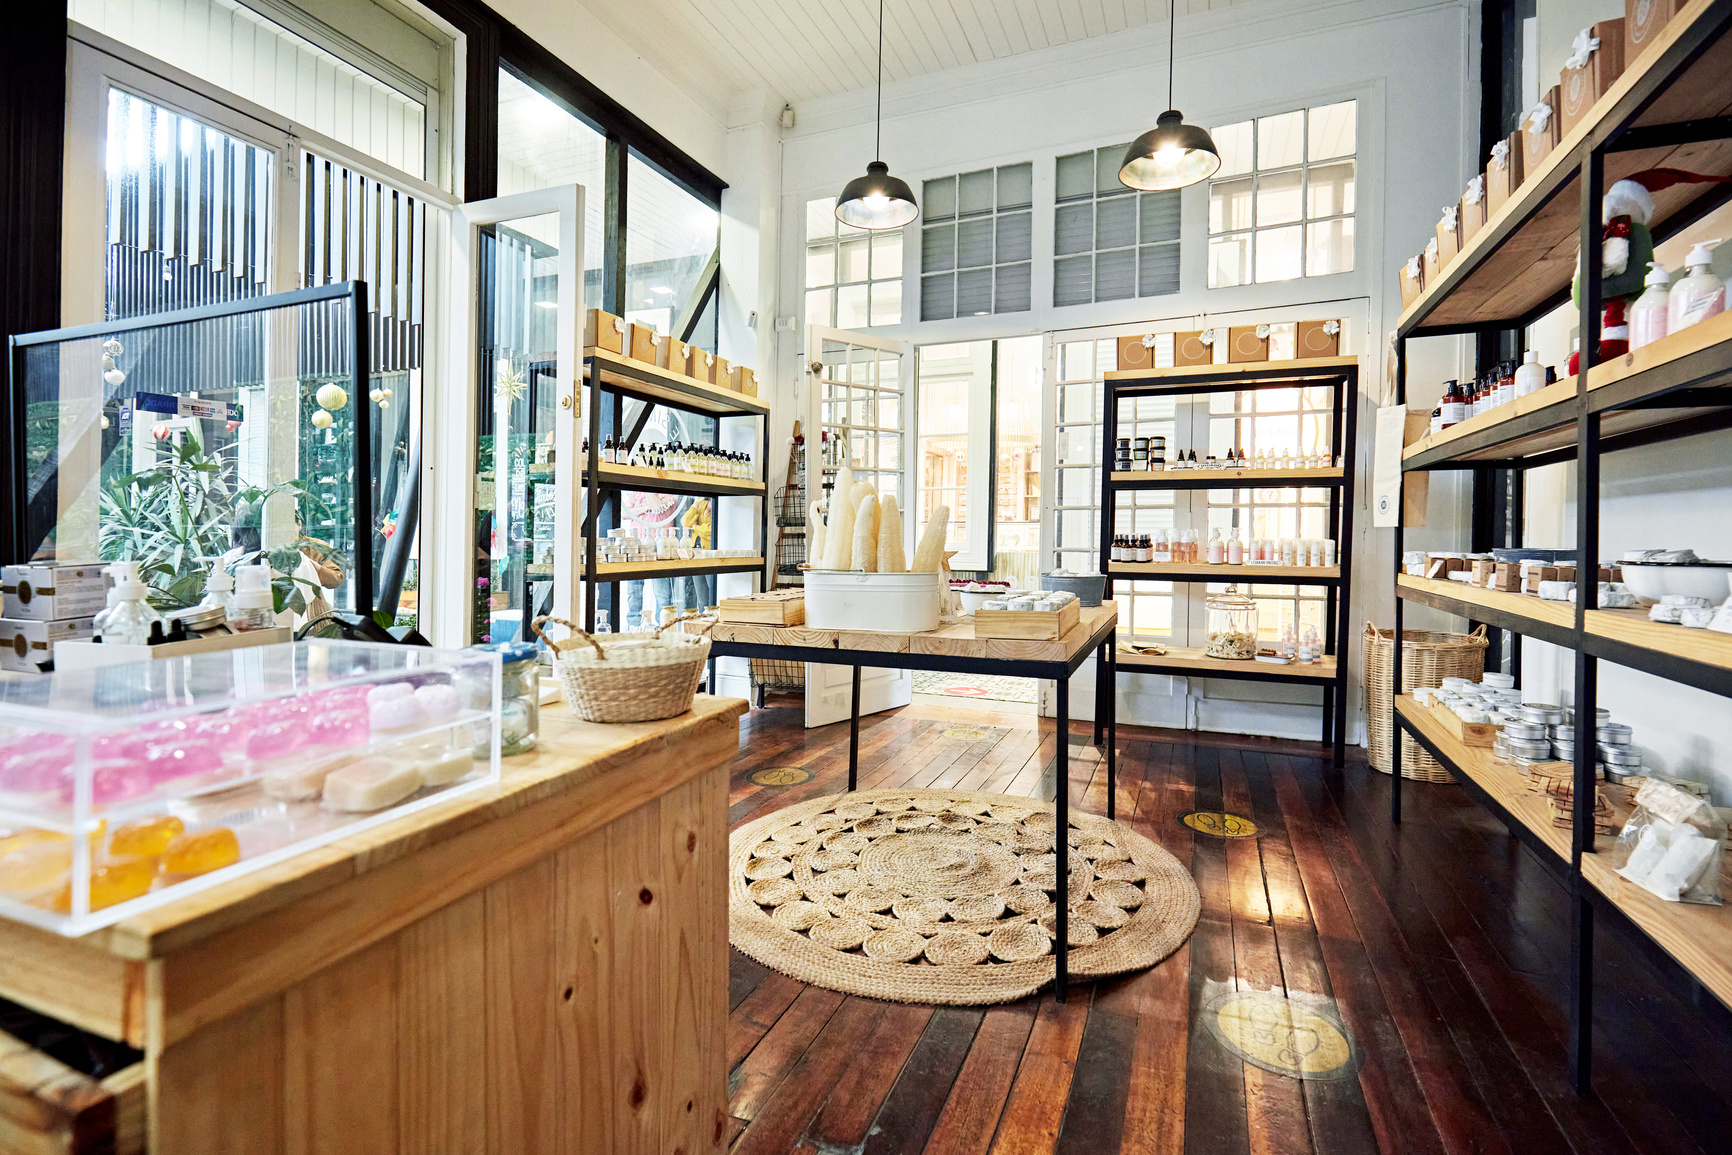 Retail shop selling organic health and beauty products